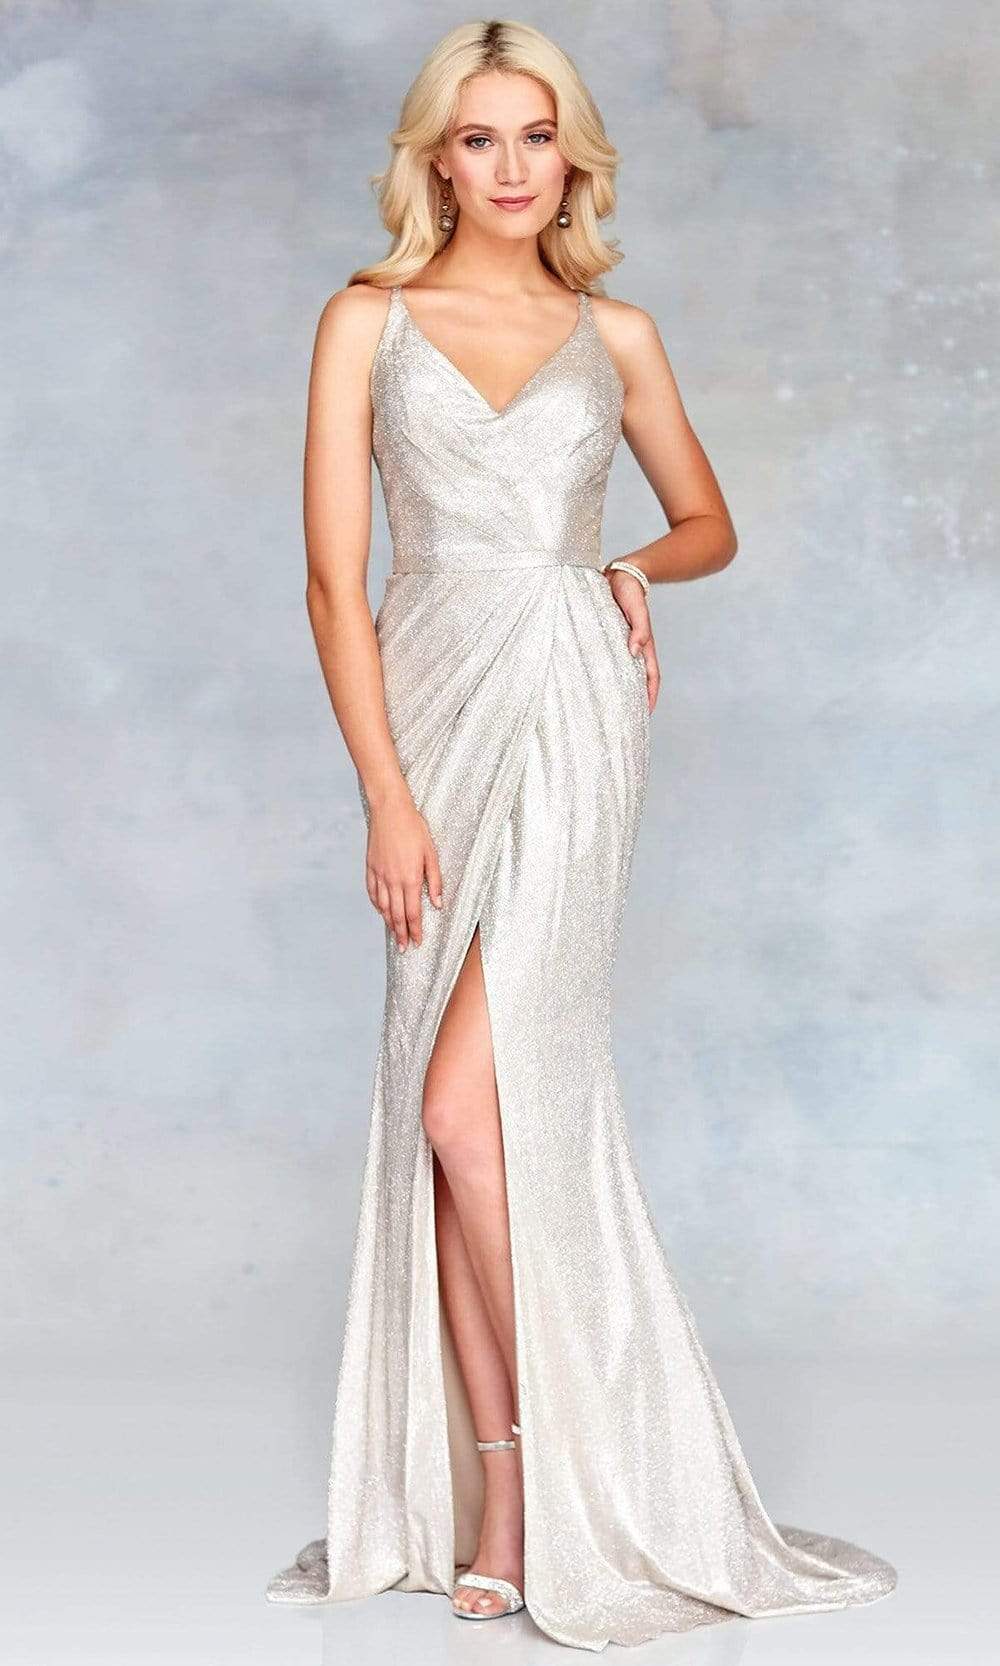 Image of Clarisse - 3766 V Neck Strappy Back Glitter Knit Evening Gown